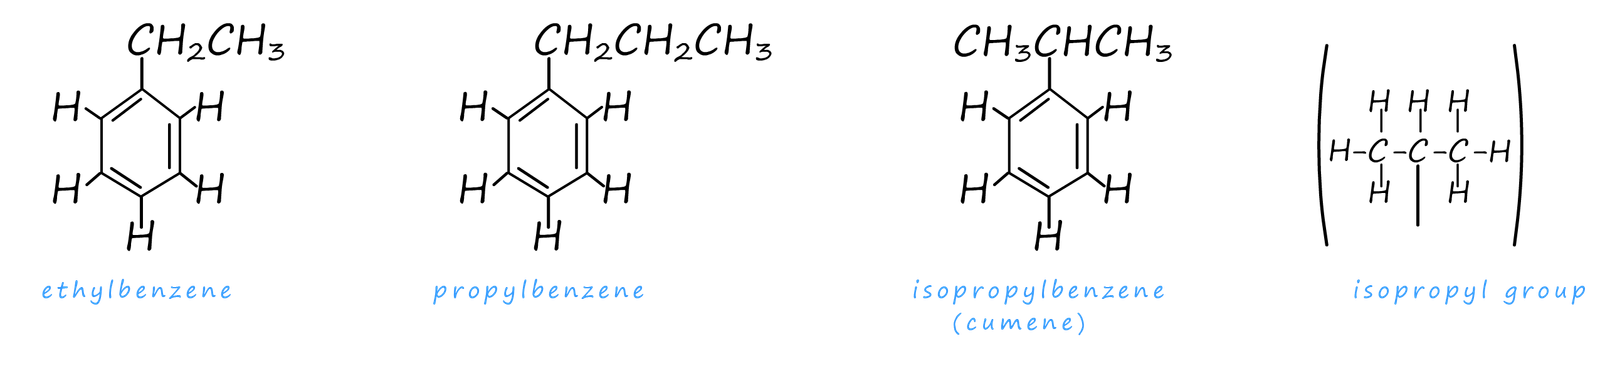 examples of arene molecules